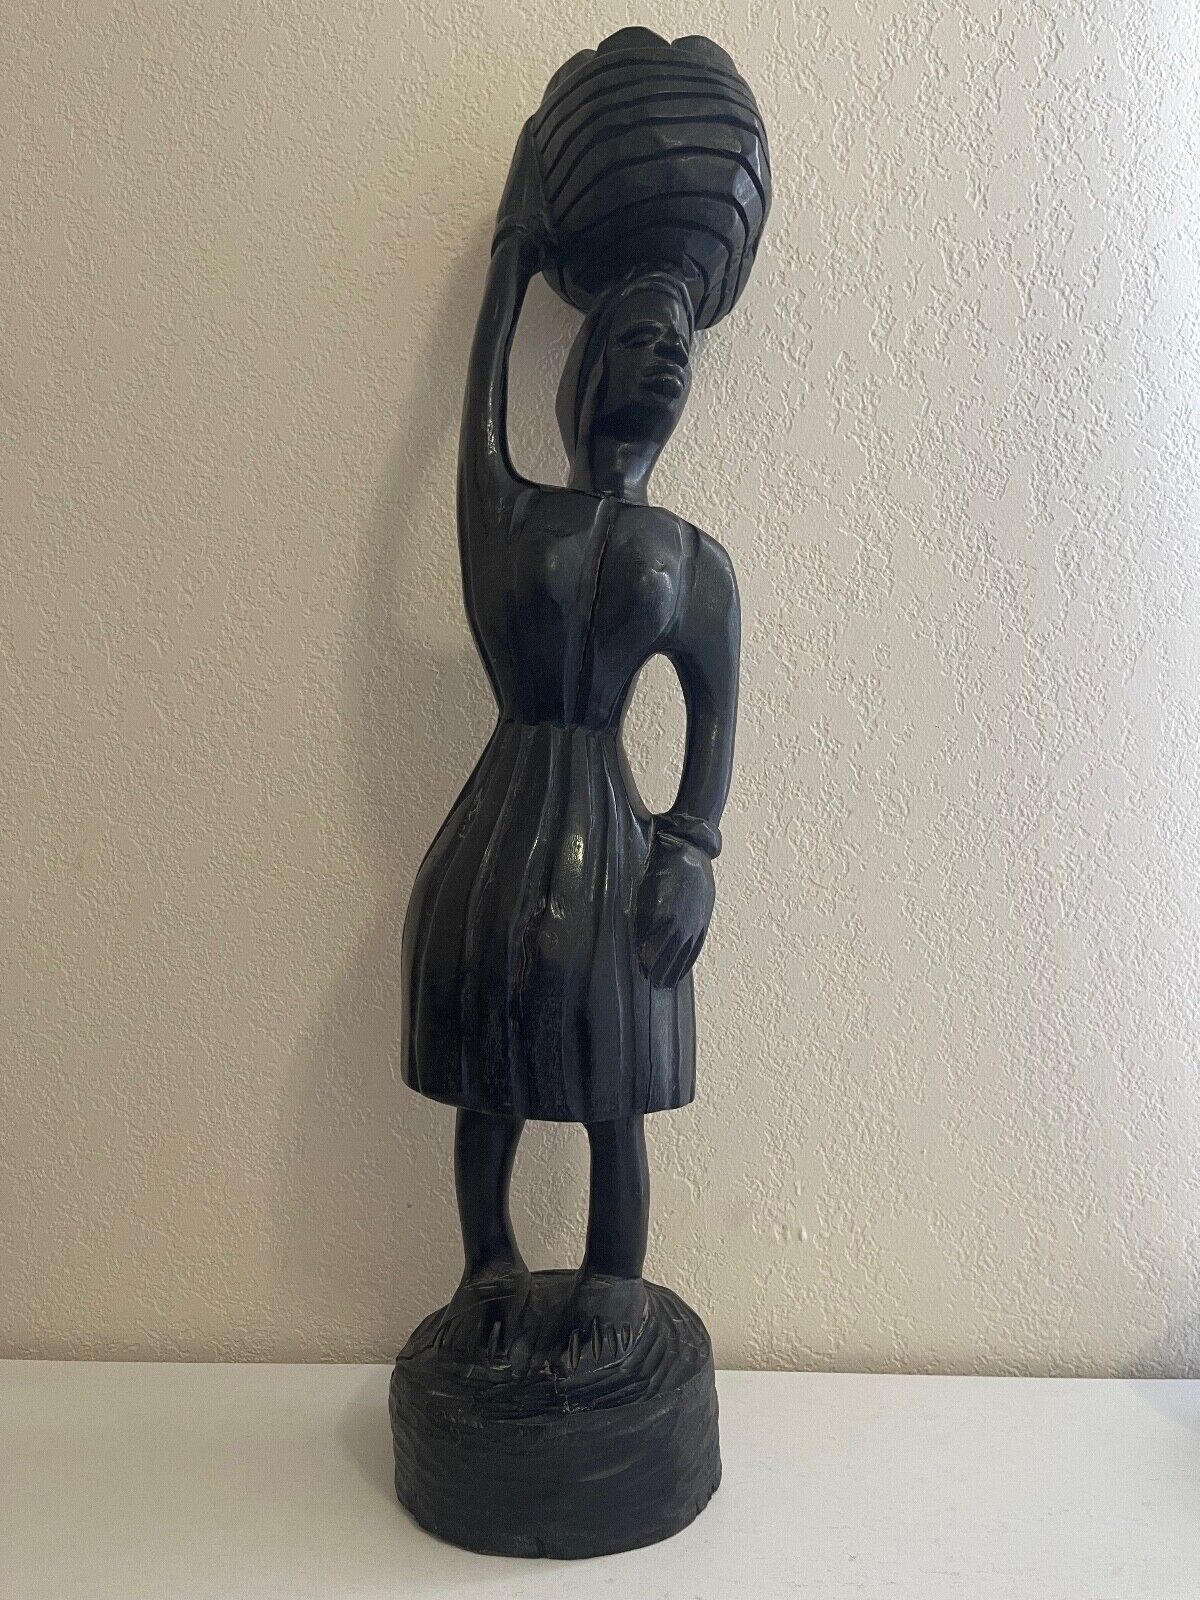 Vtg Ethnic Tribal Possibly African Carved Wood Large Statue of Woman w/ Basket